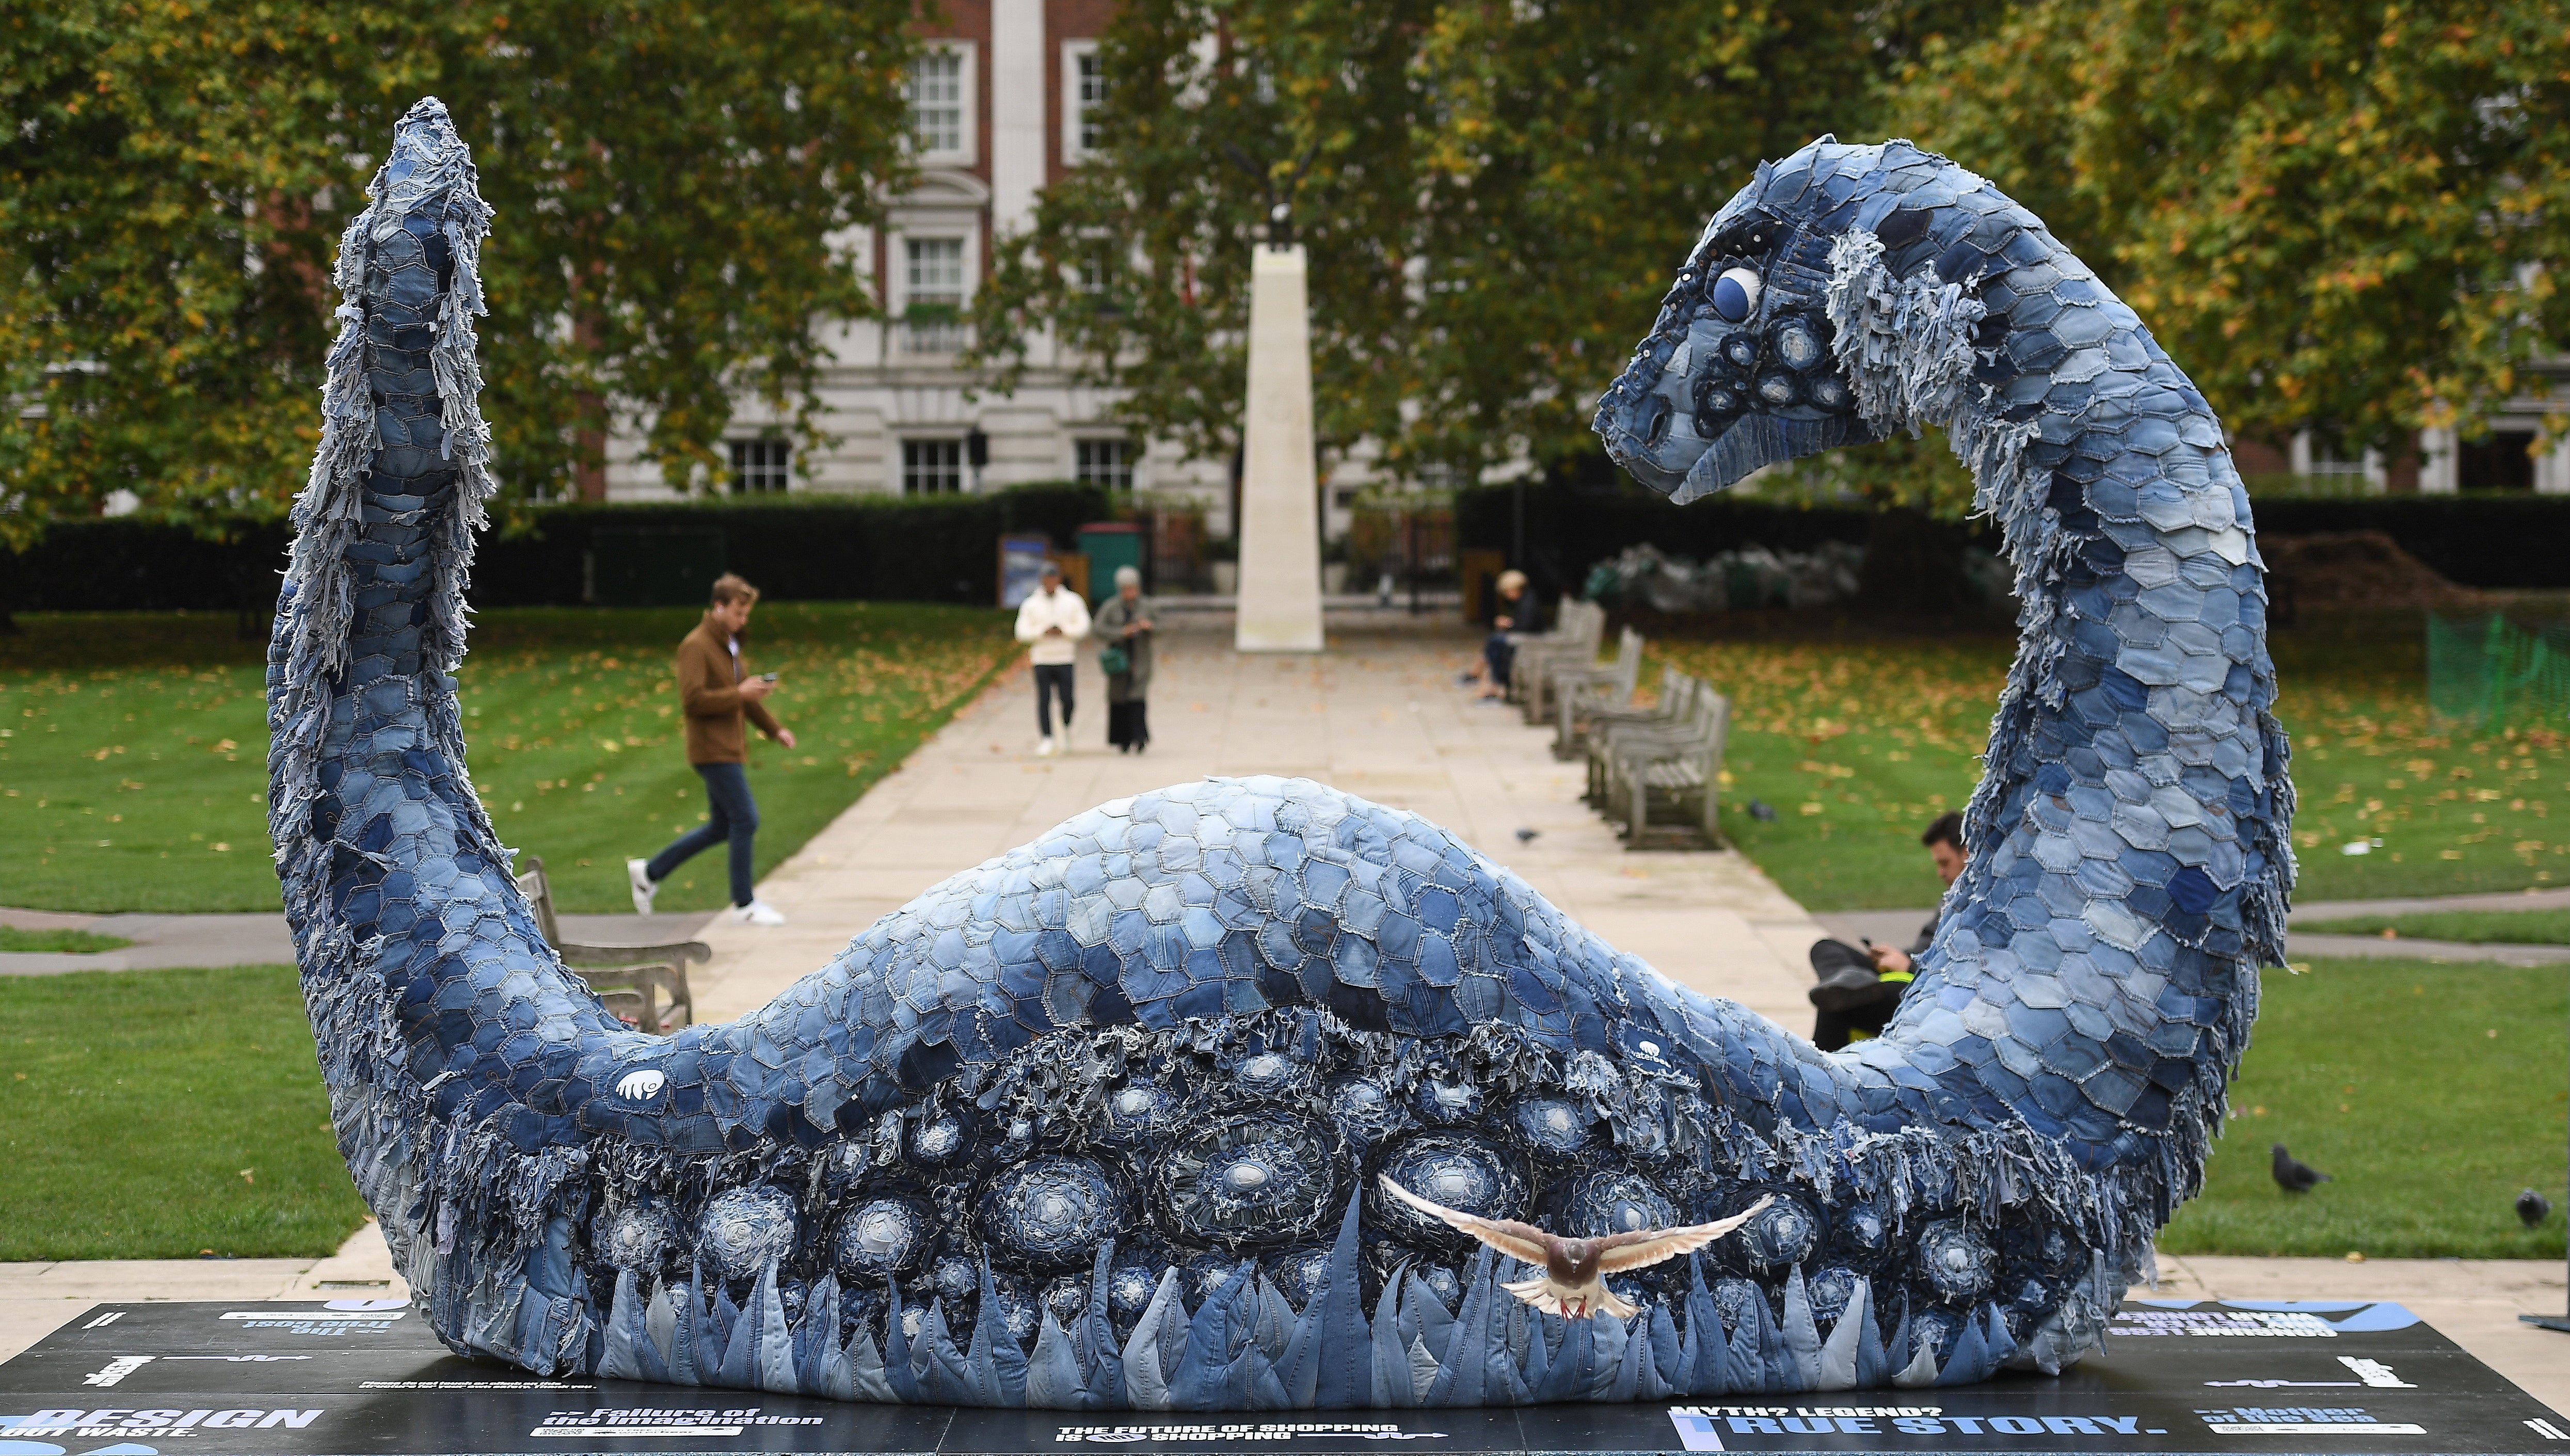 The artwork is attempting to highlight the polluting effects that denim has on the environment